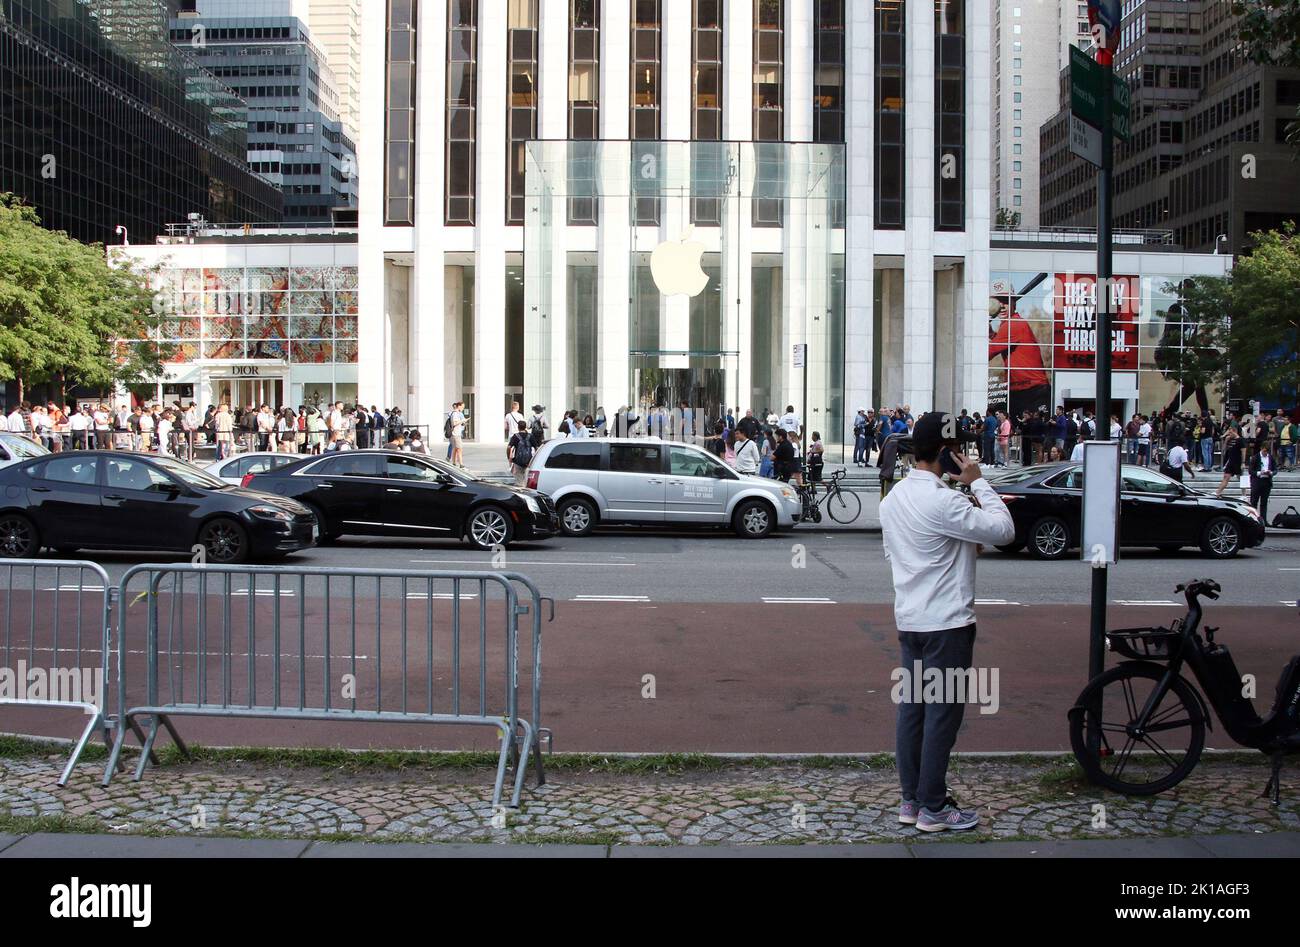 New York, NY, USA. 16th Sep, 2022. View of the Apple Store during today's iPhone 14 launch at Apple's 5th Avenue store in New York City on September 16, 2022. Credit: Rw/Media Punch/Alamy Live News Stock Photo